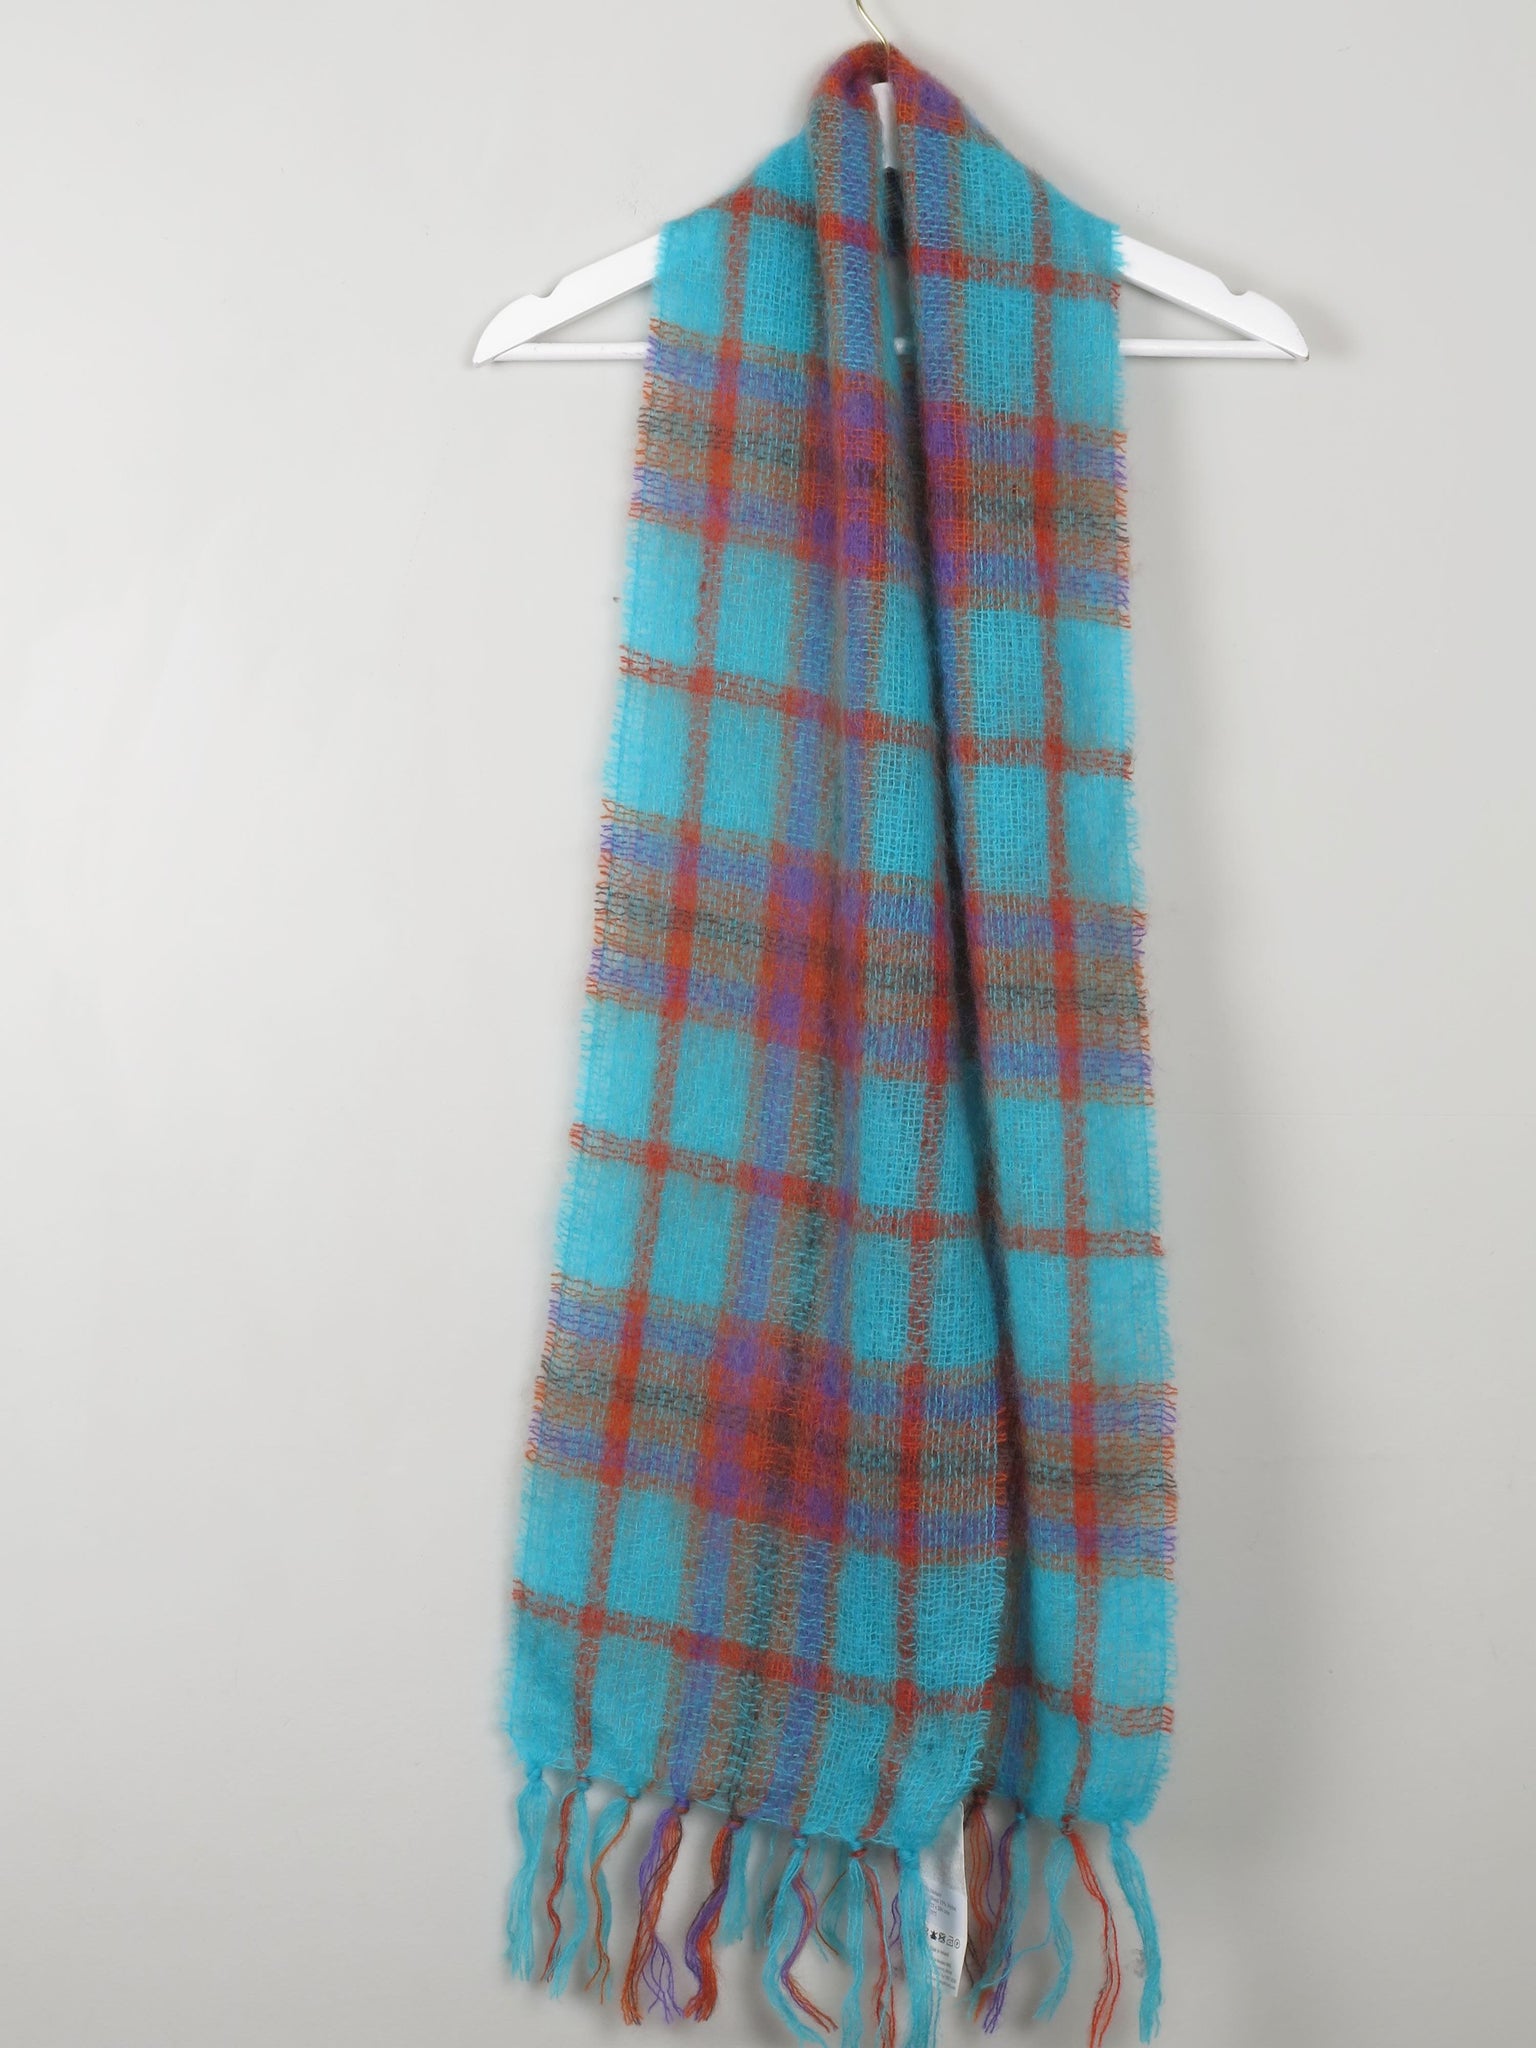 Colourful Mohair Scarf By John Hanley - The Harlequin